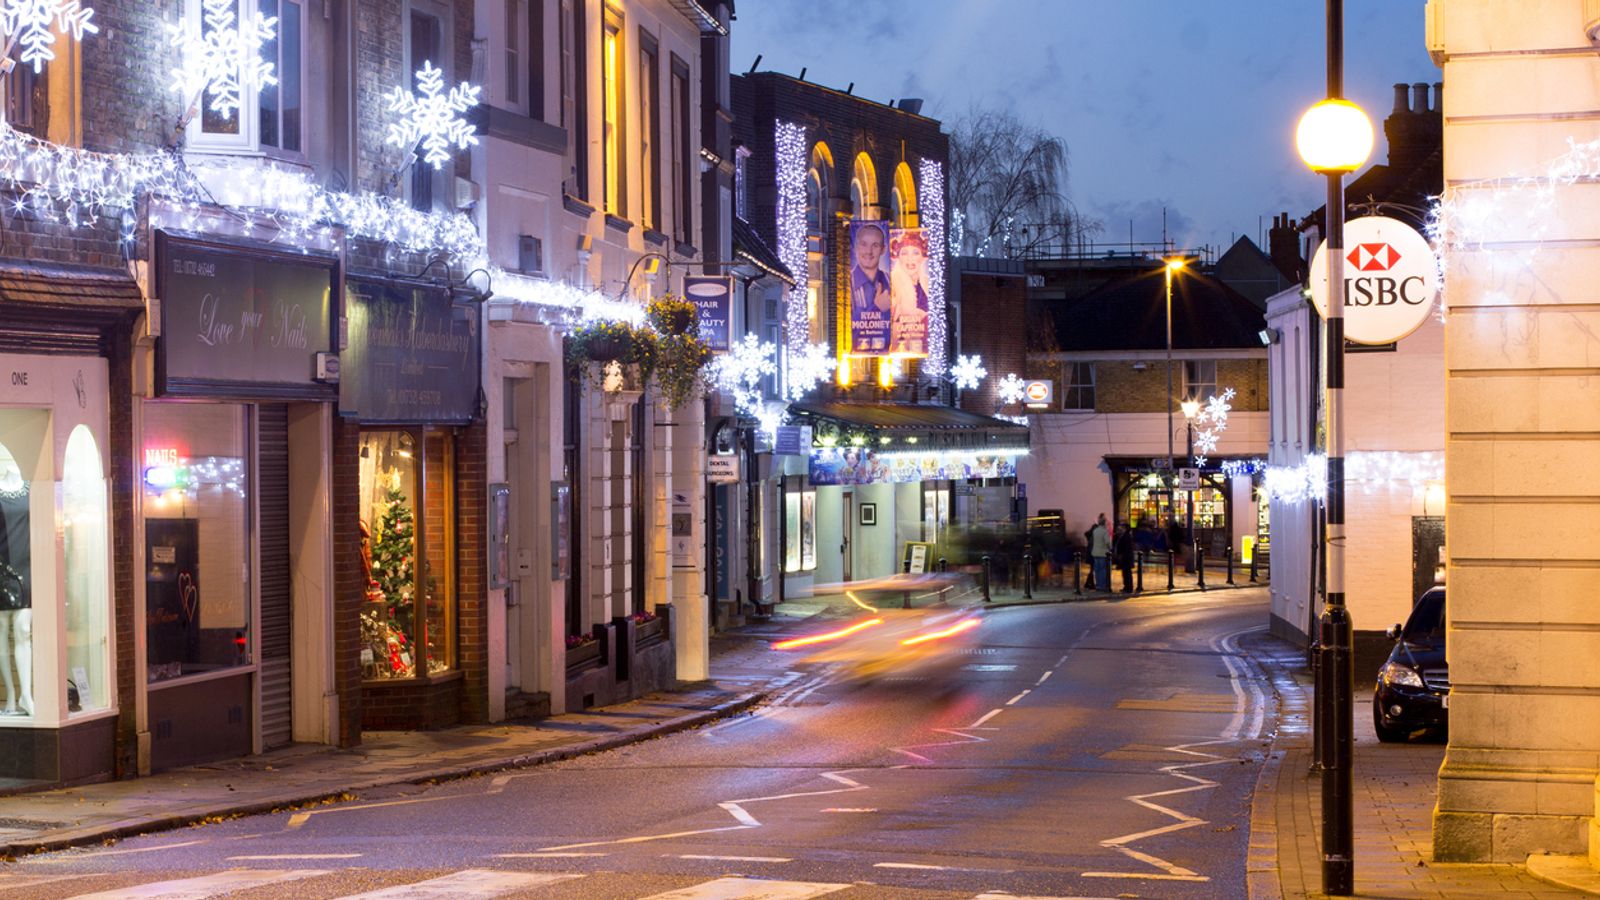 Kent council axes Christmas lights due to 'challenging financial situation'